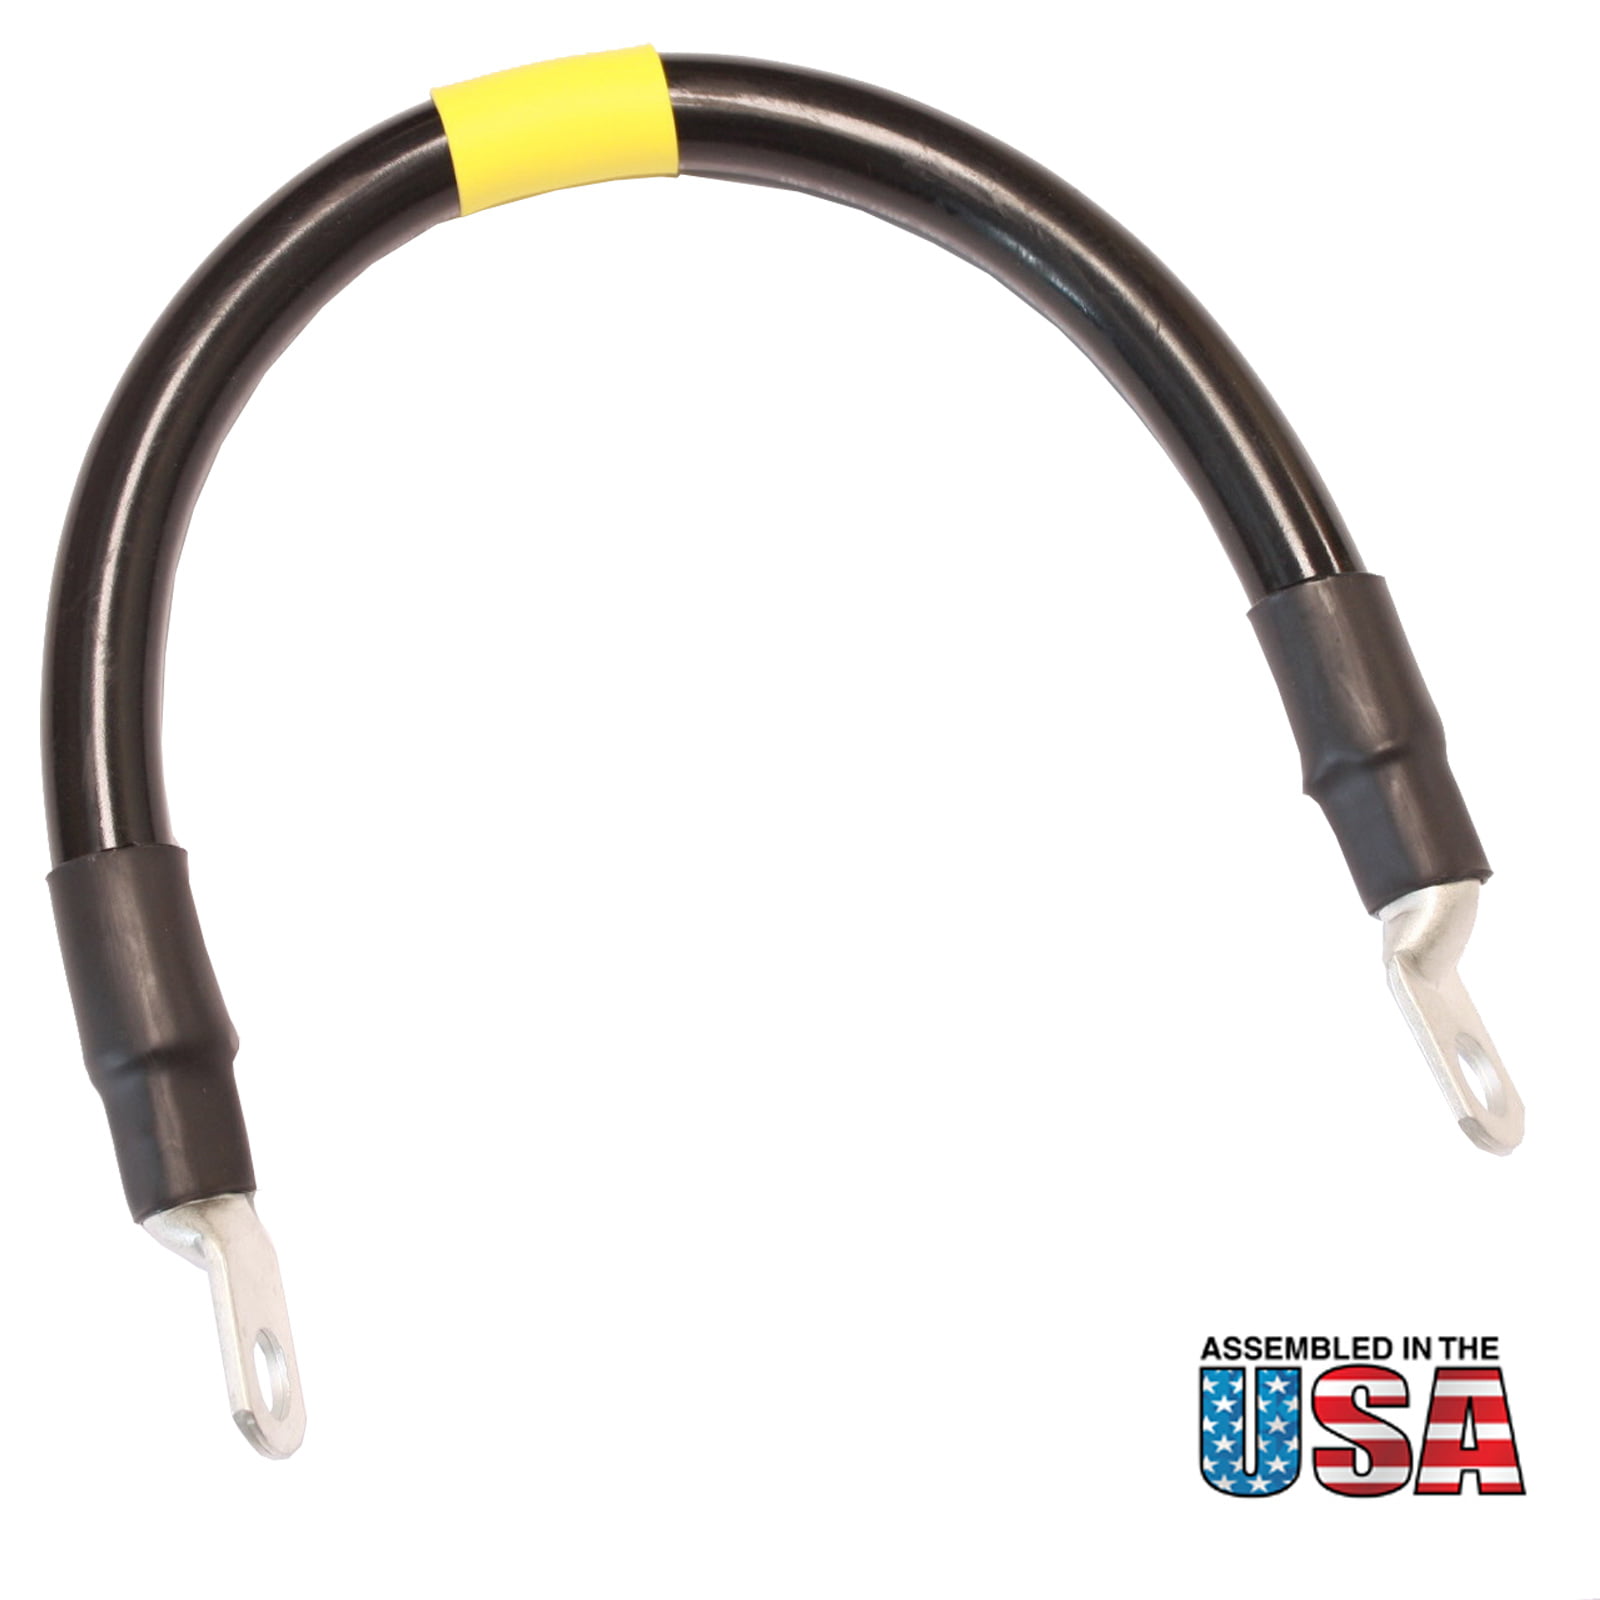 12 inch with 3/8 Anti Corrosion Copper Ring Terminal Lugs Both Ends USA Made All Copper Flexible Stranding Black 0 Gauge 1/0 AWG Battery Cable 